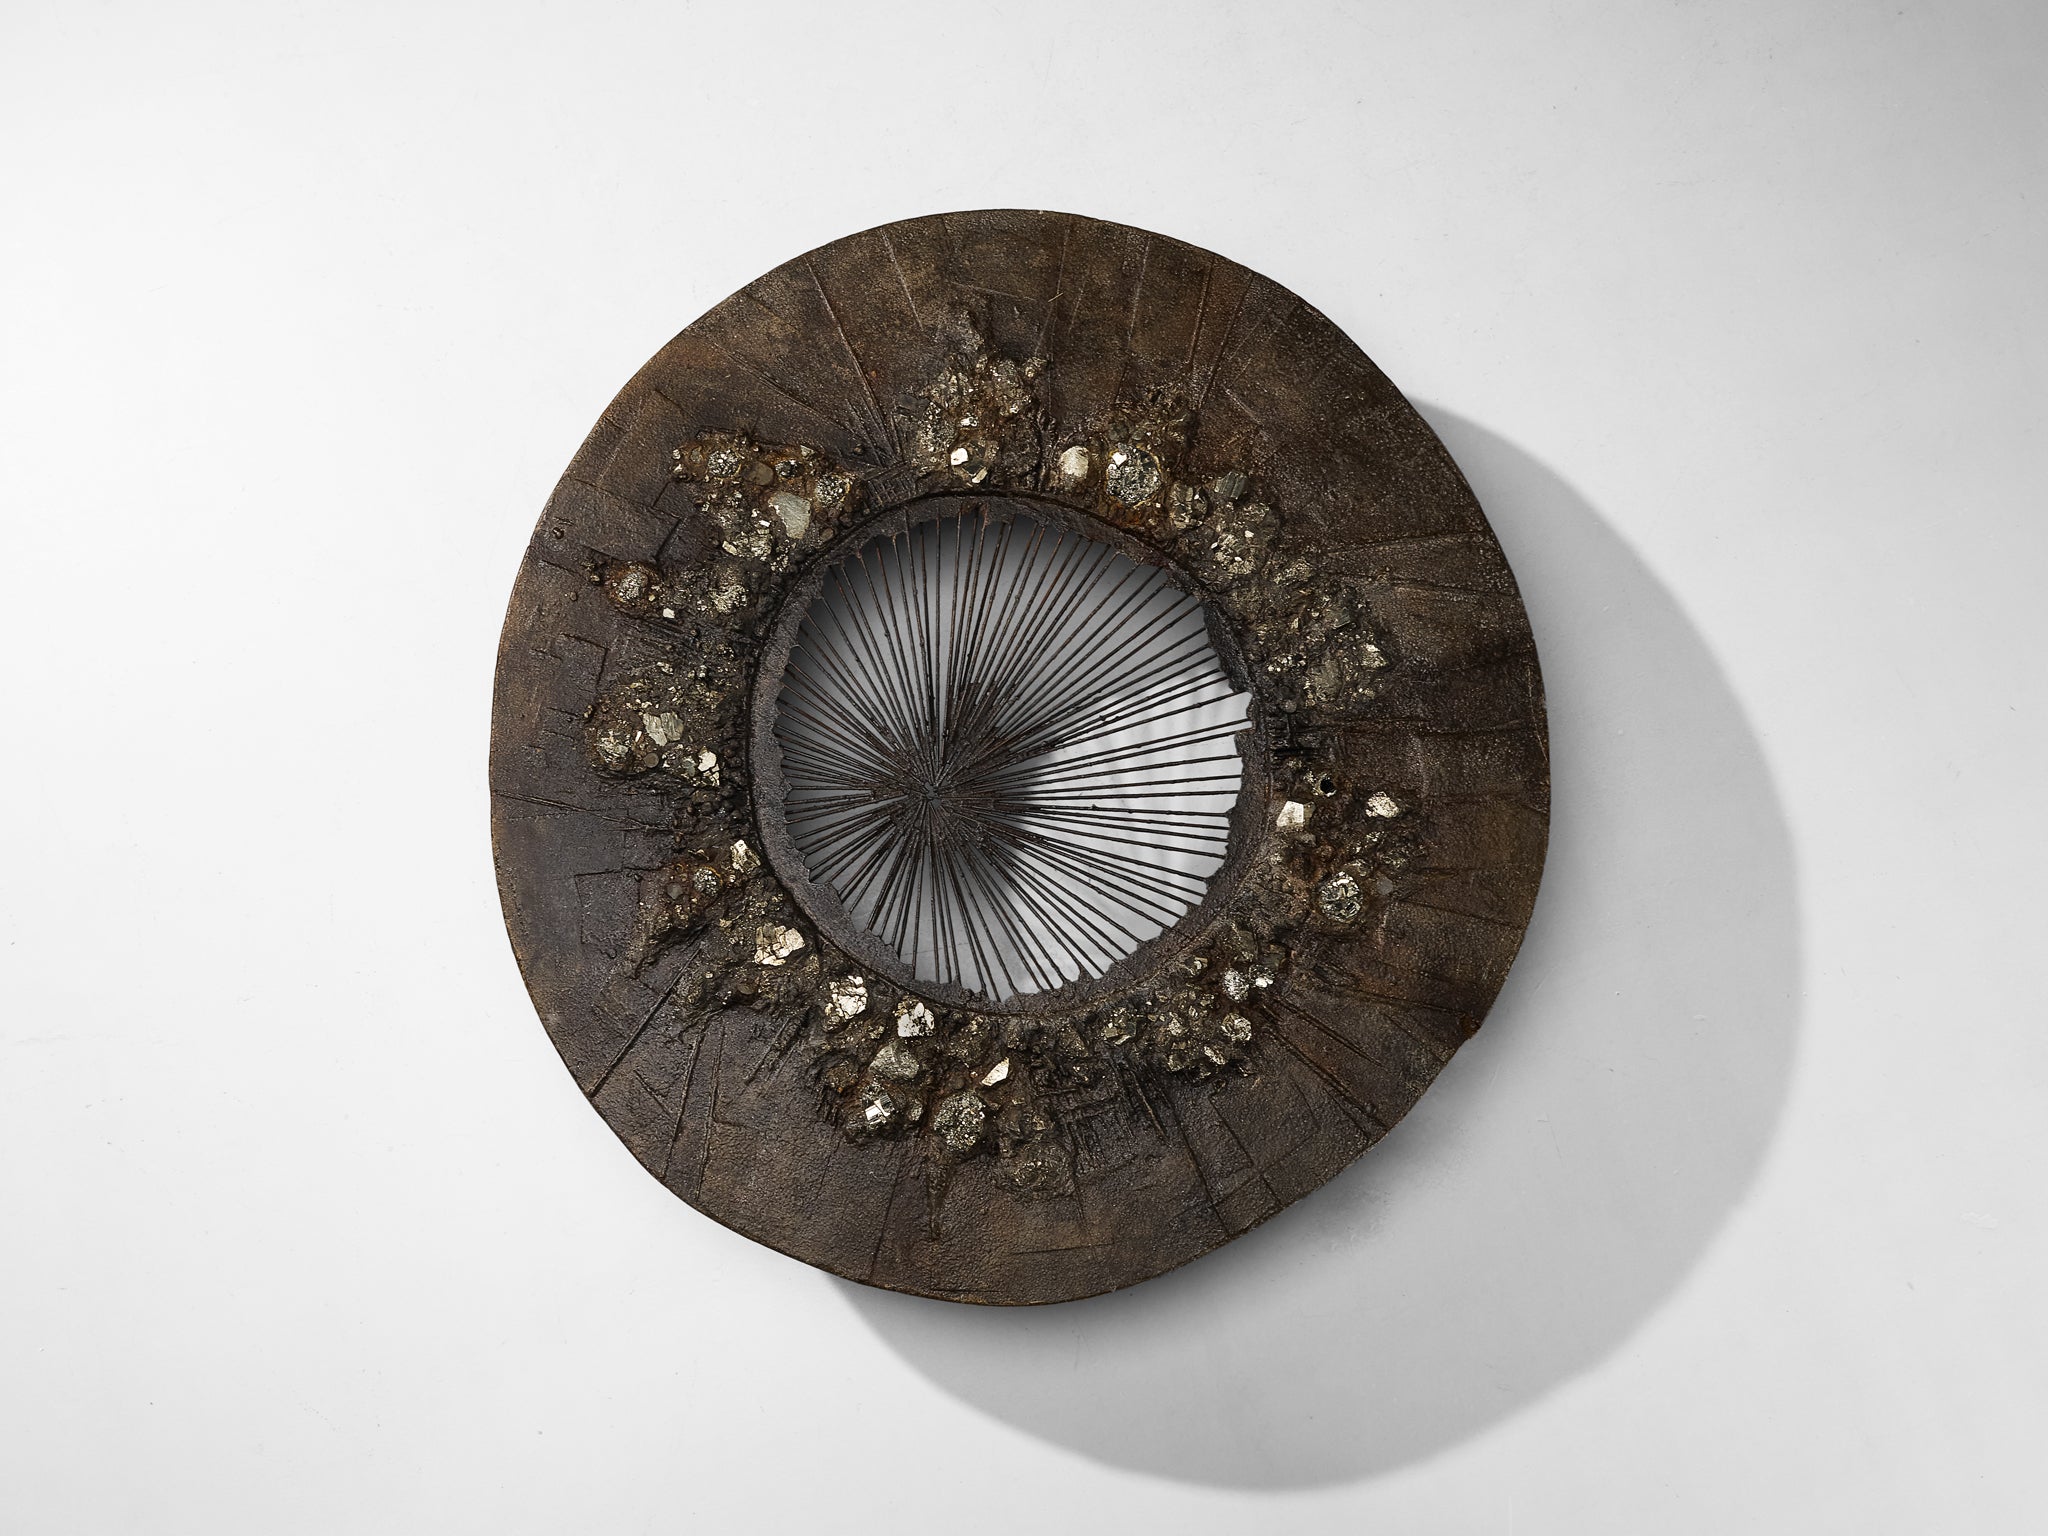 Unique Pia Manu Handcrafted Coffee Table in Pyrite and Ammonite